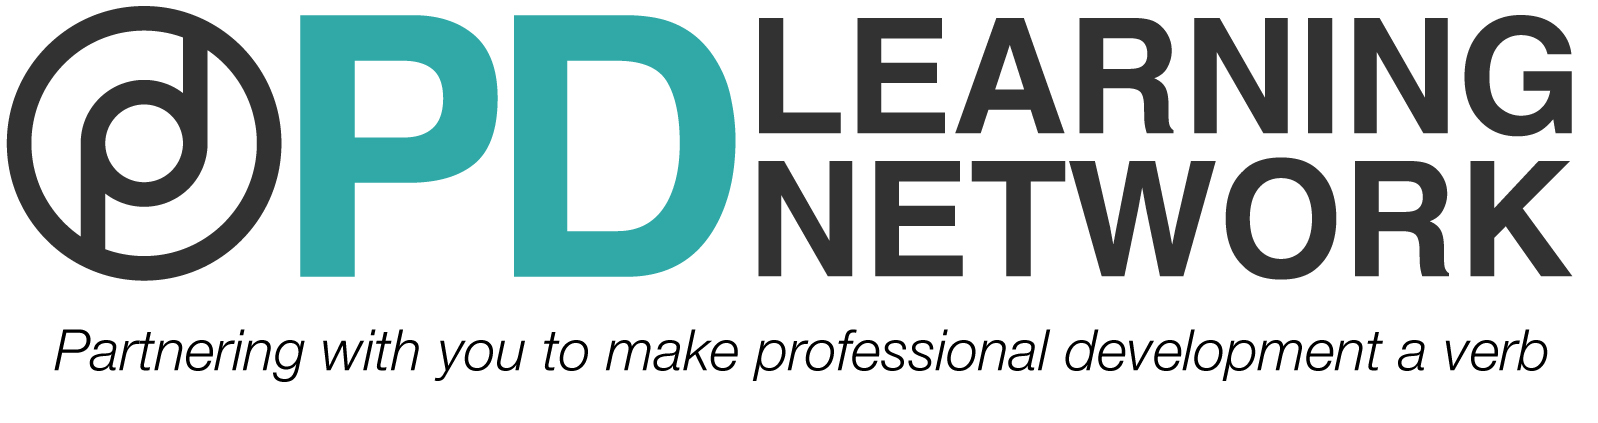 PD Learning Network We Make Professional Development a Verb